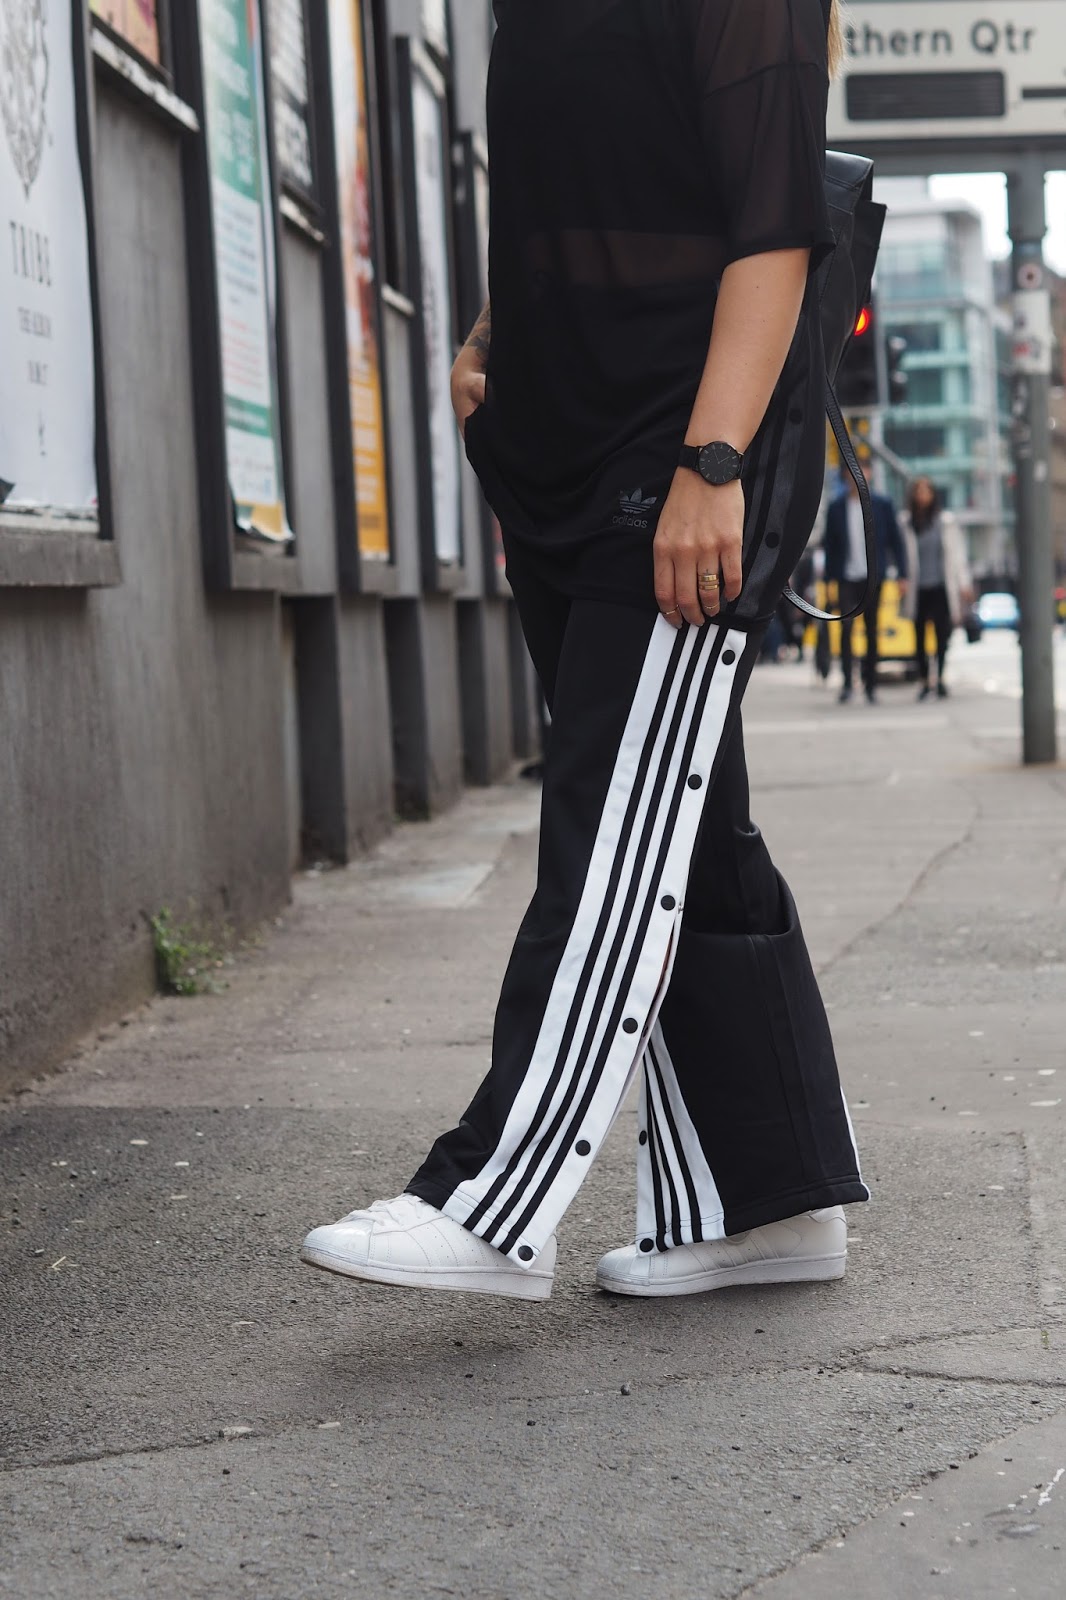 adidas popper pants outfit